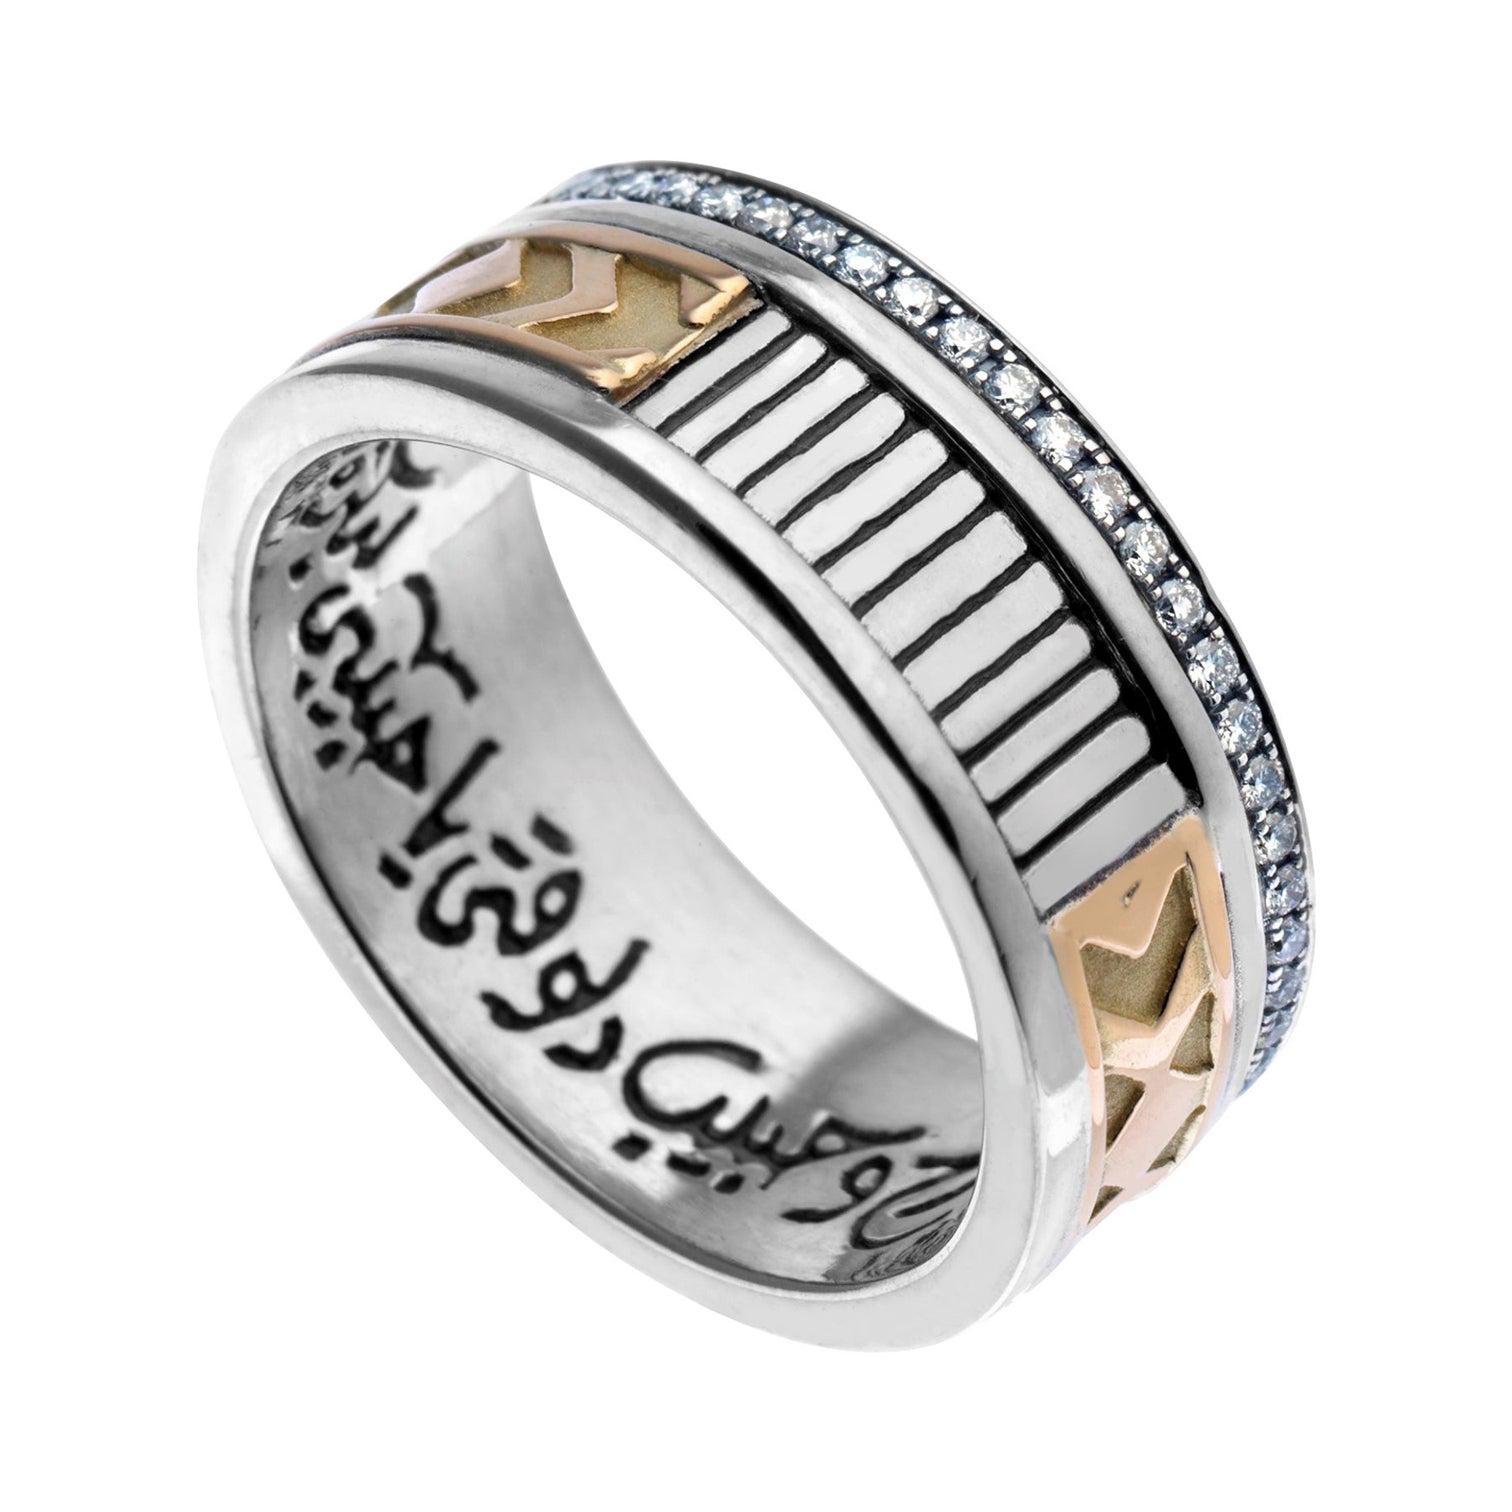 For Sale:  18 Karat Gold, Sterling Silver & 0.38 Carat Diamond Calligraphy "Love" Band Ring